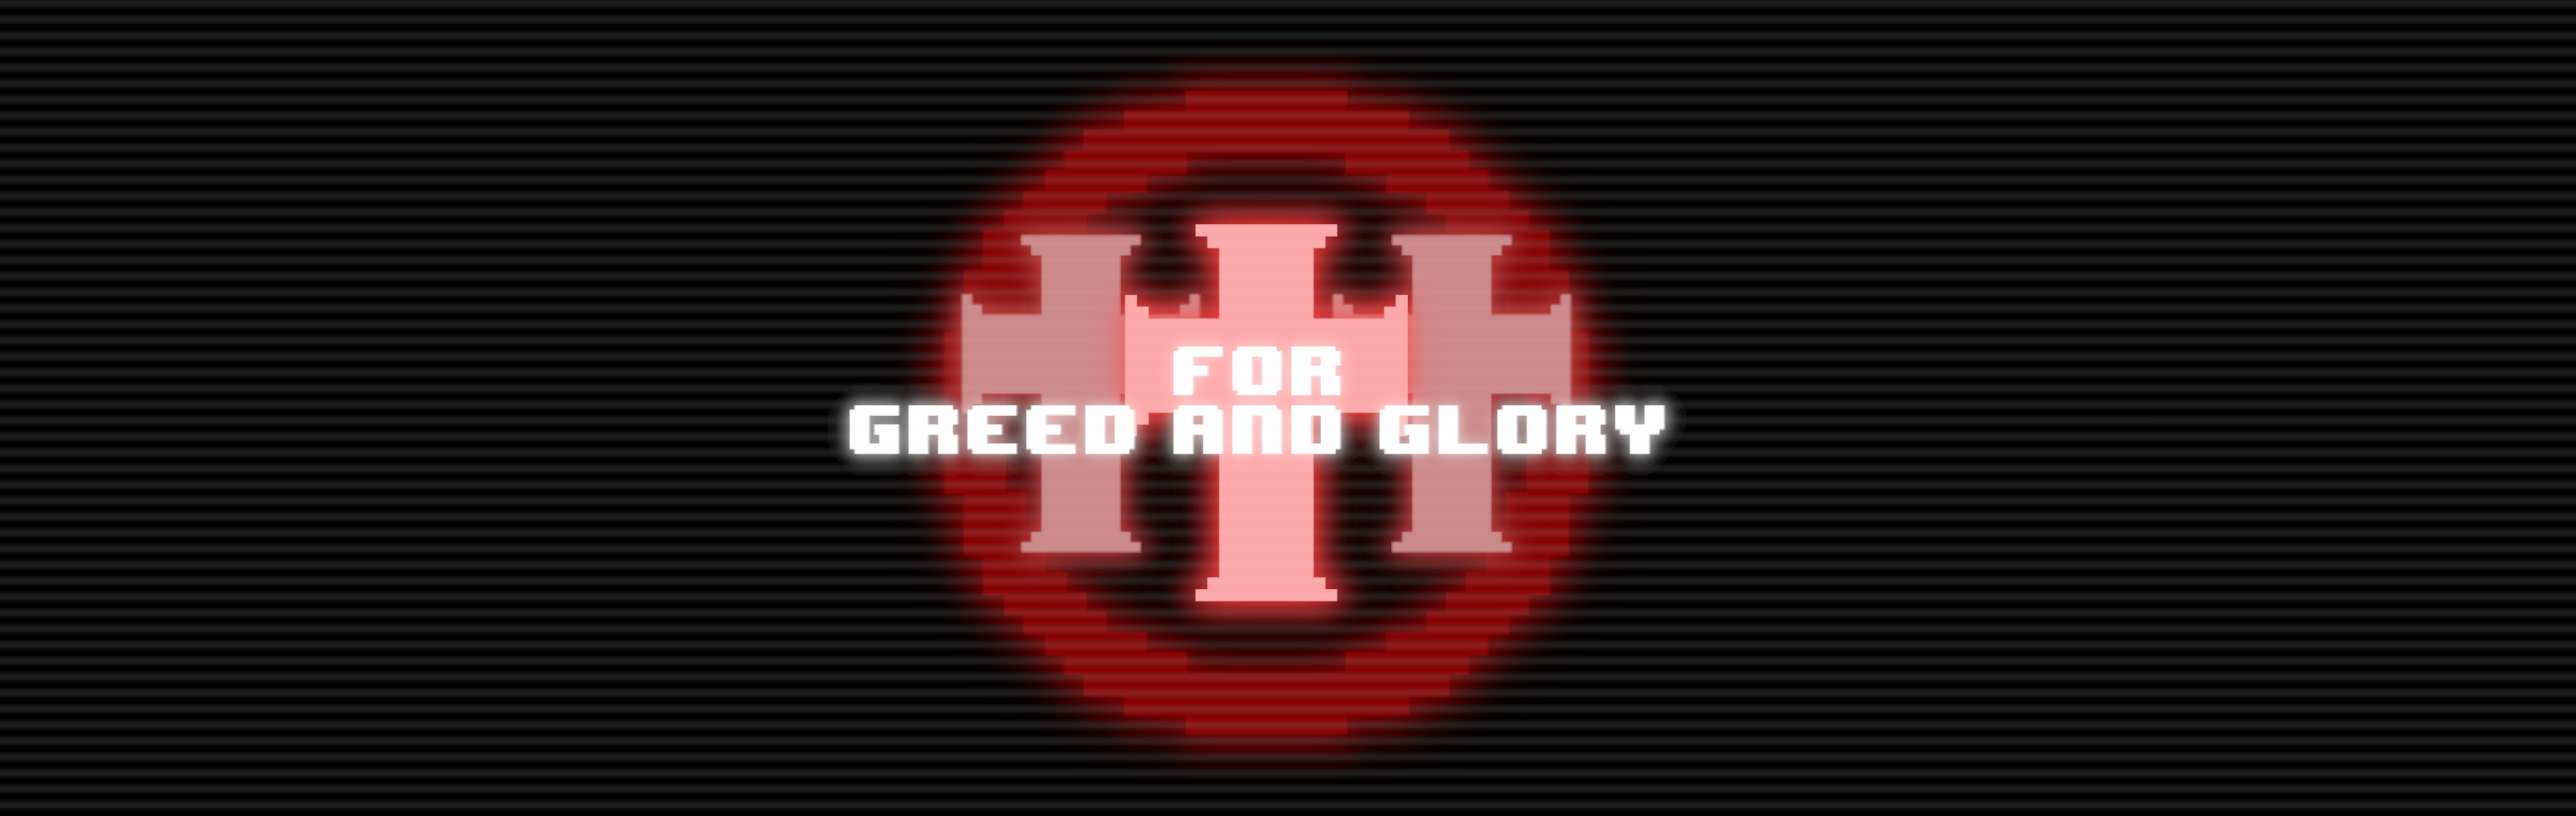 For Greed and Glory